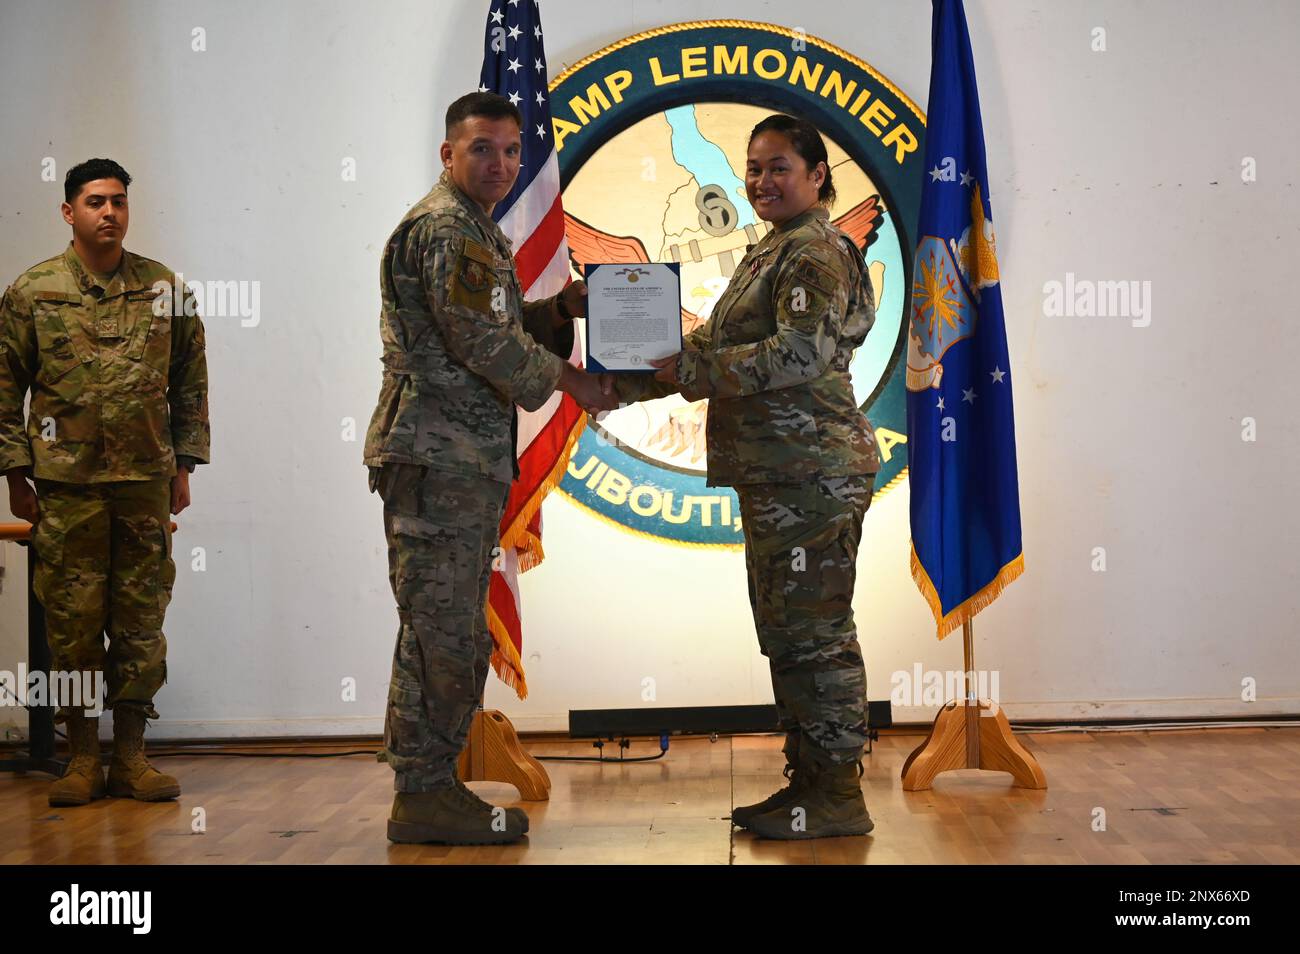 U.S. Air Force Col. Jason Chambers, commander of the 449th Air Expeditionary Group, awards Maj. Mercy Te’o, departing commander of the 726th Expeditionary Air Base Squadron (EABS), with the Meritorious Service Medal at the 726th EABS change of command ceremony at Camp Lemonnier, Djibouti, Feb. 1, 2023. The 726th EABS provides security forces, satellite communications, munitions support, vehicle management, contracting, finance and logistics in support of east Africa operations. Stock Photo